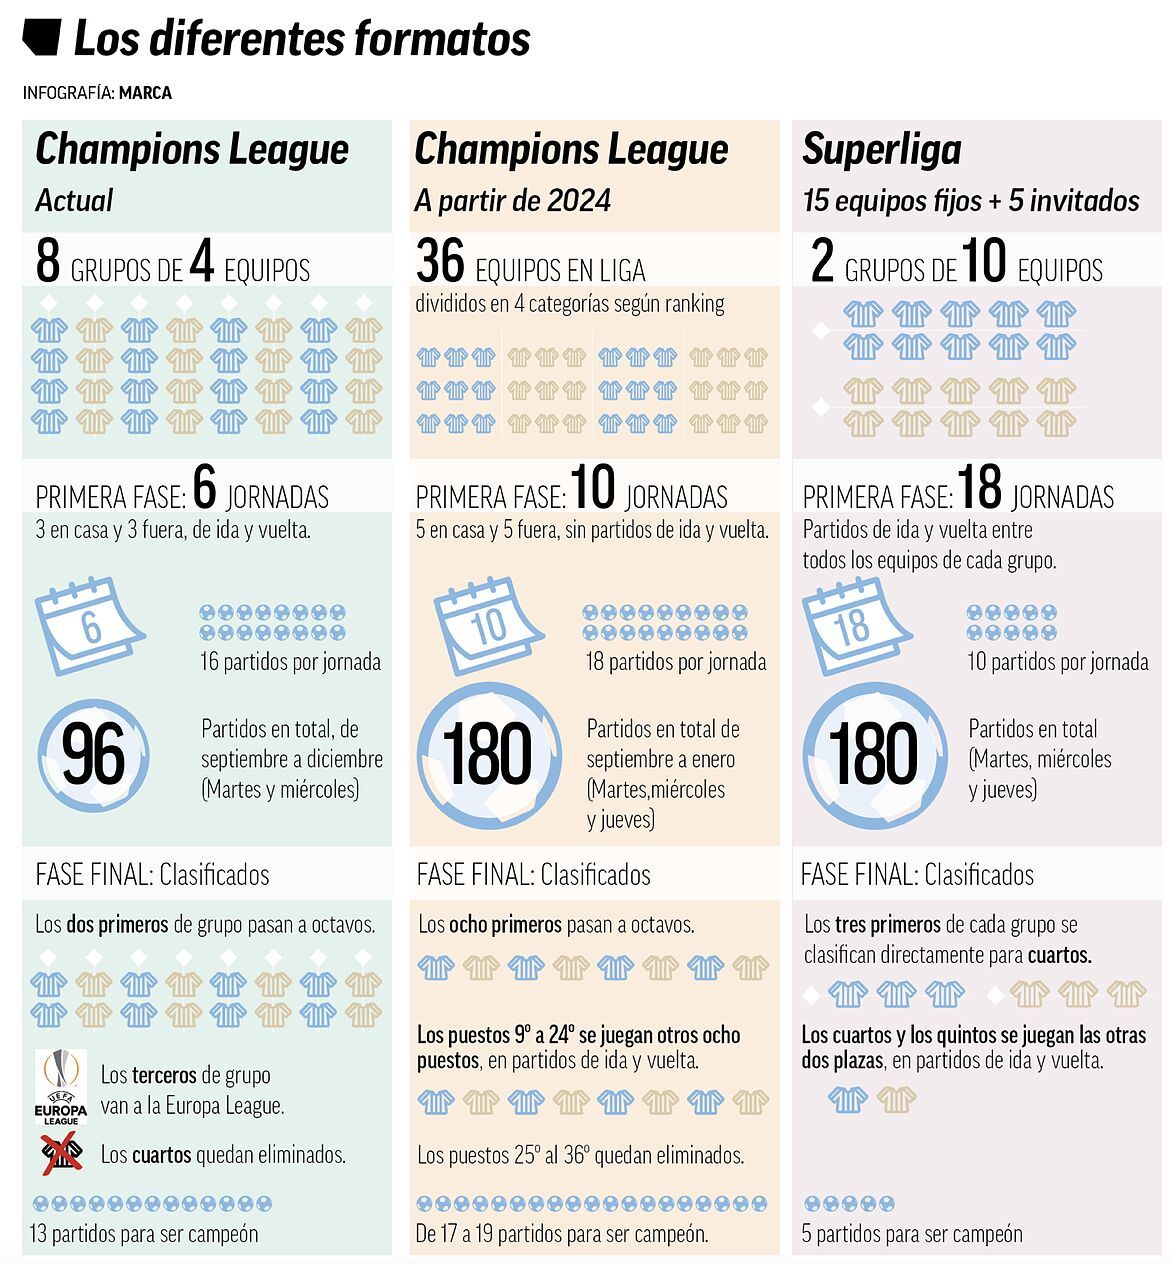 Differences between the current Champions League, the new format and the European Super League